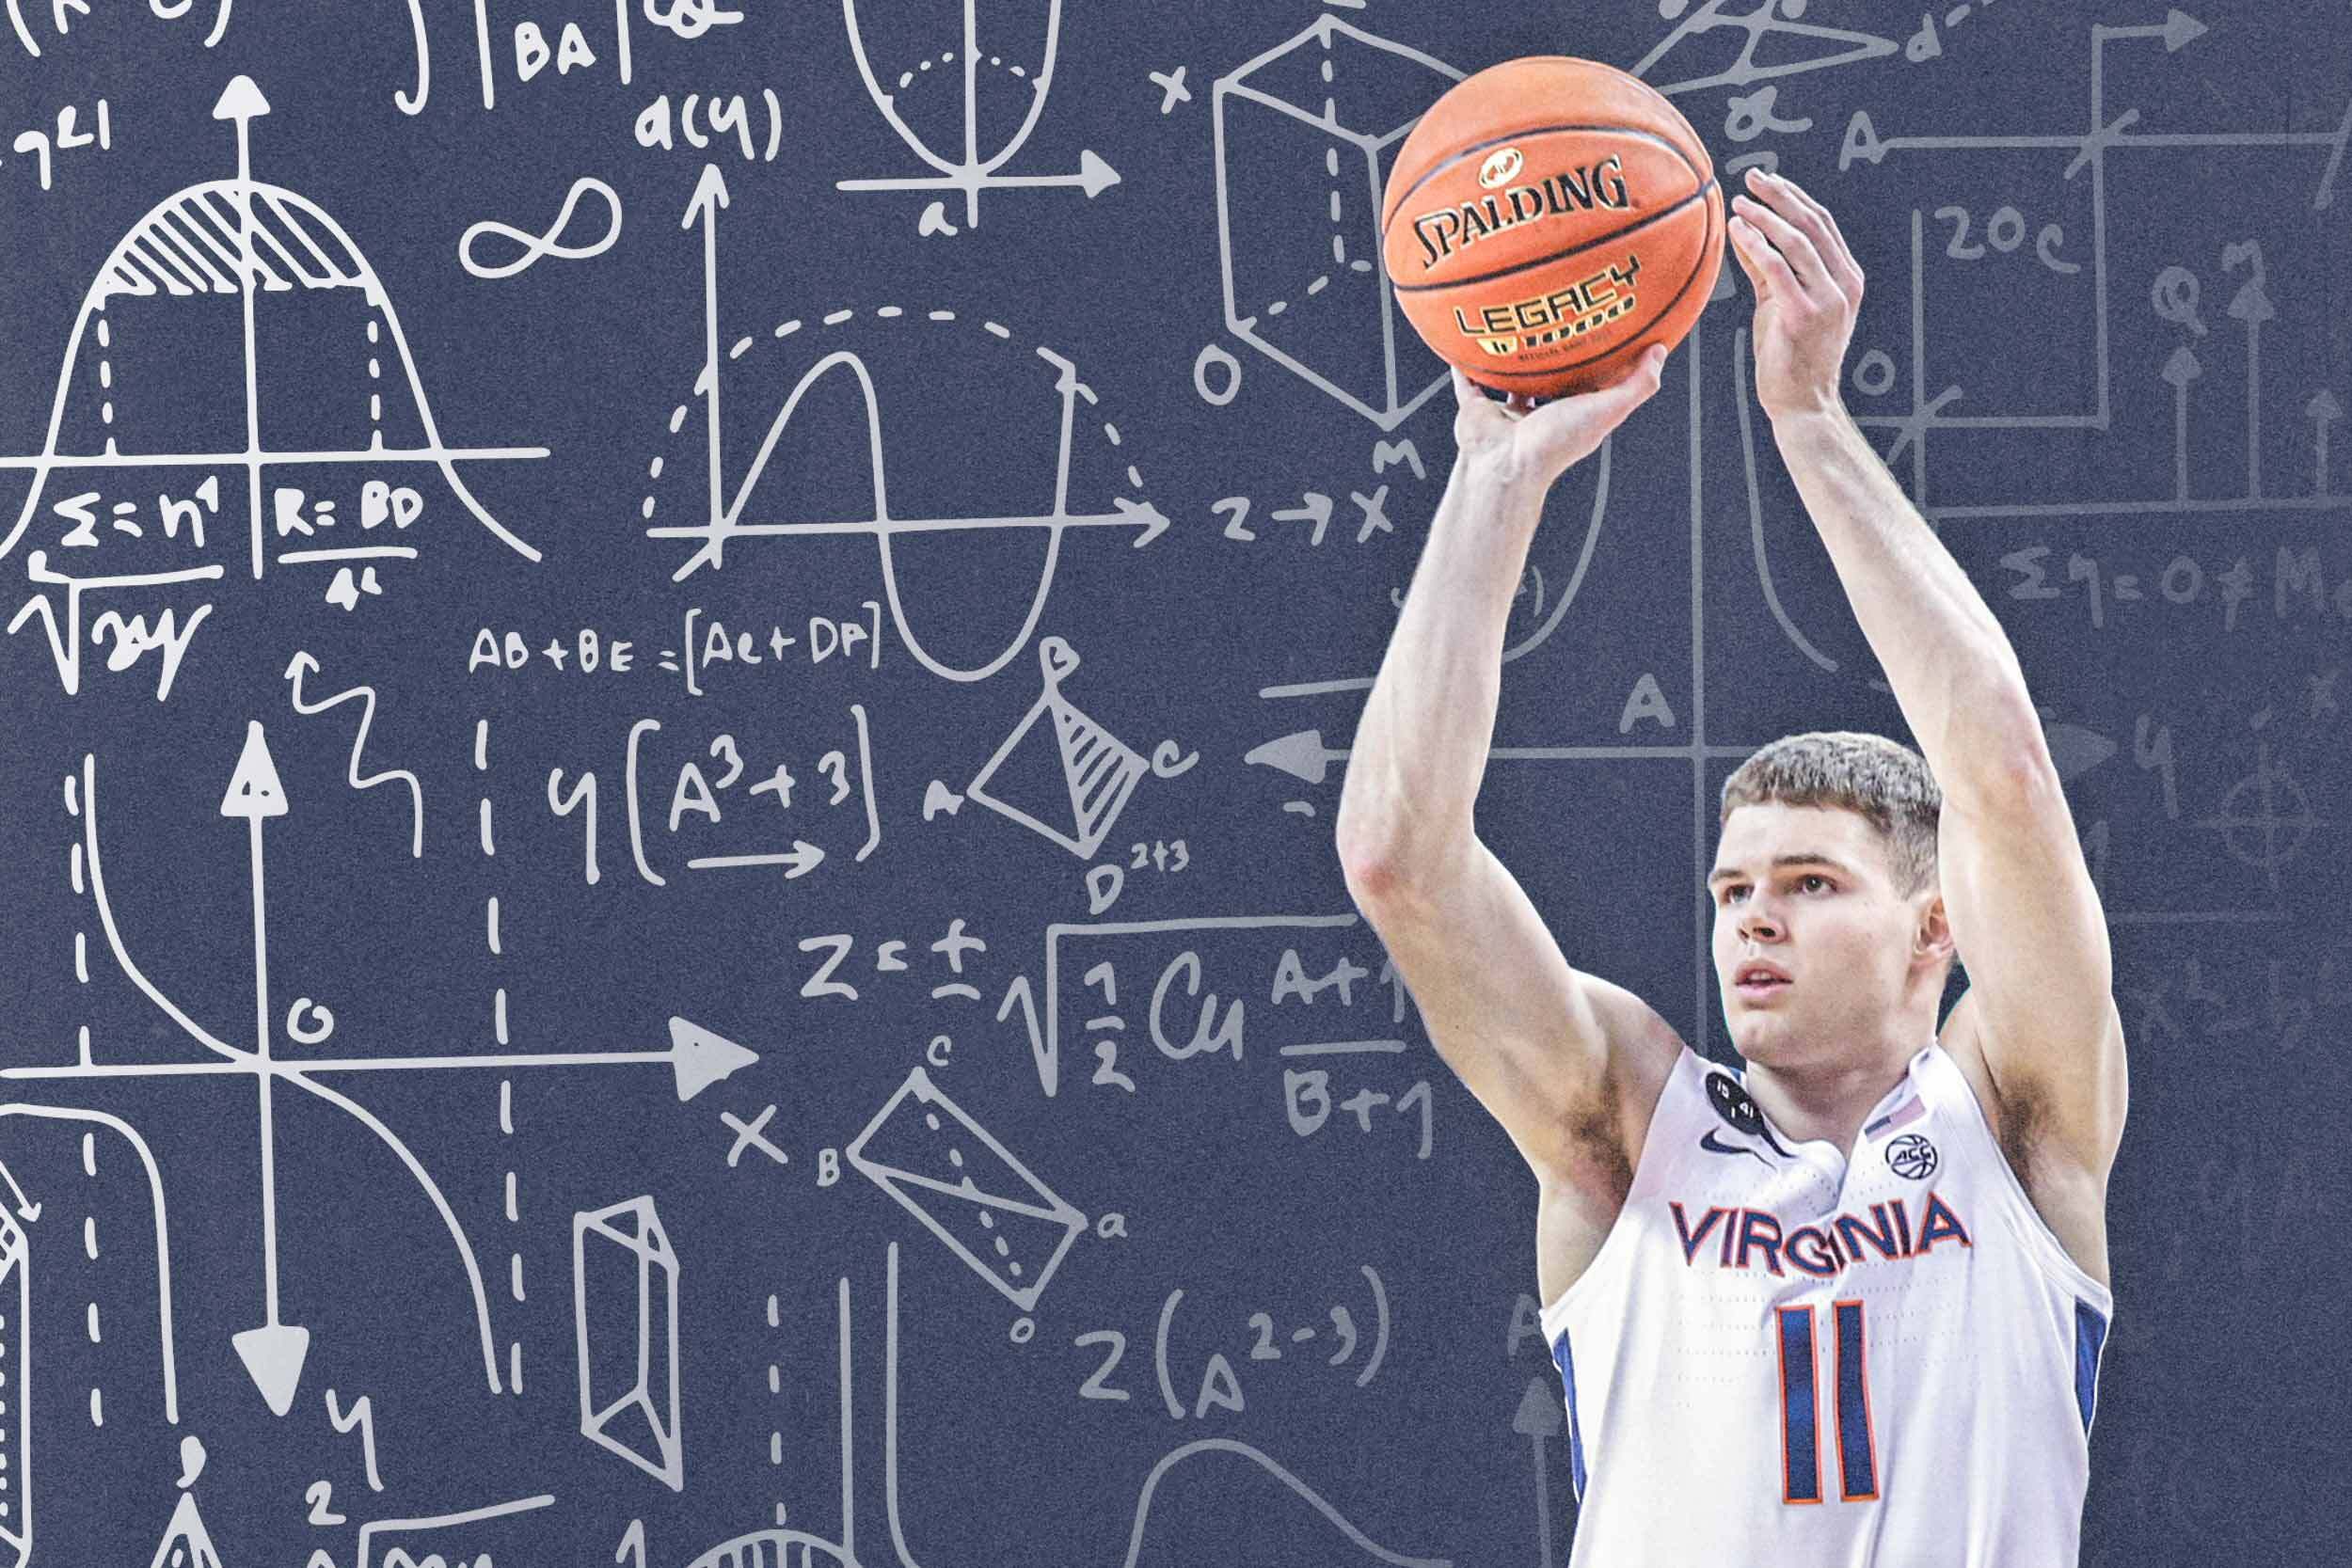 Issac goes up for the basket with physics equations in the background of the graphic